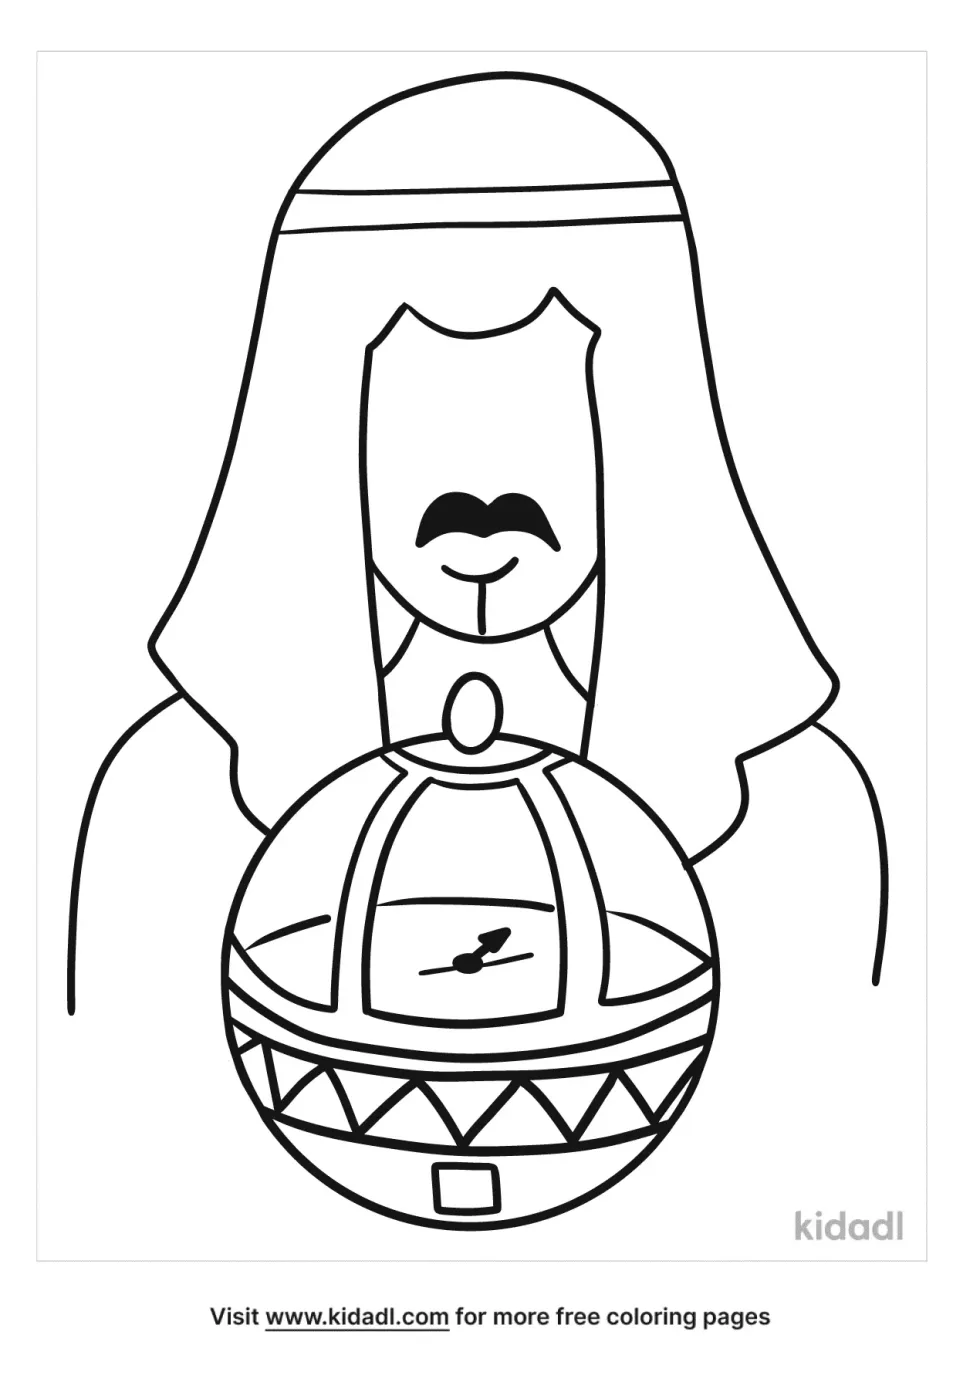 Lehi And The Liahona Coloring Page